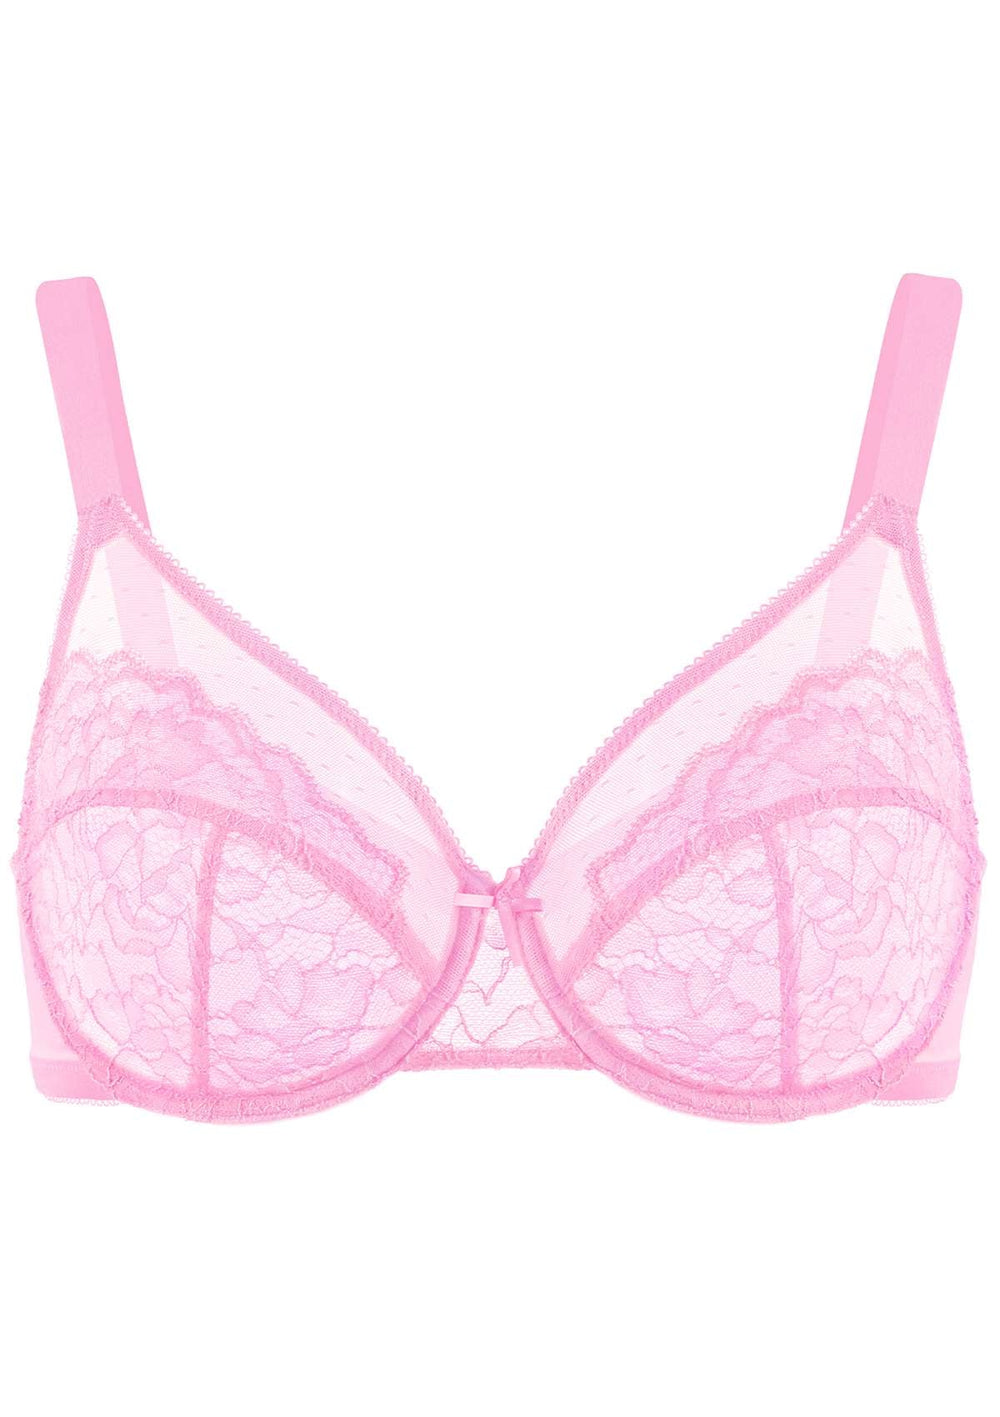 Buy Victoria's Secret Pink Berry Unlined Balcony Lightly Lined Lace Demi Bra  from the Next UK online shop